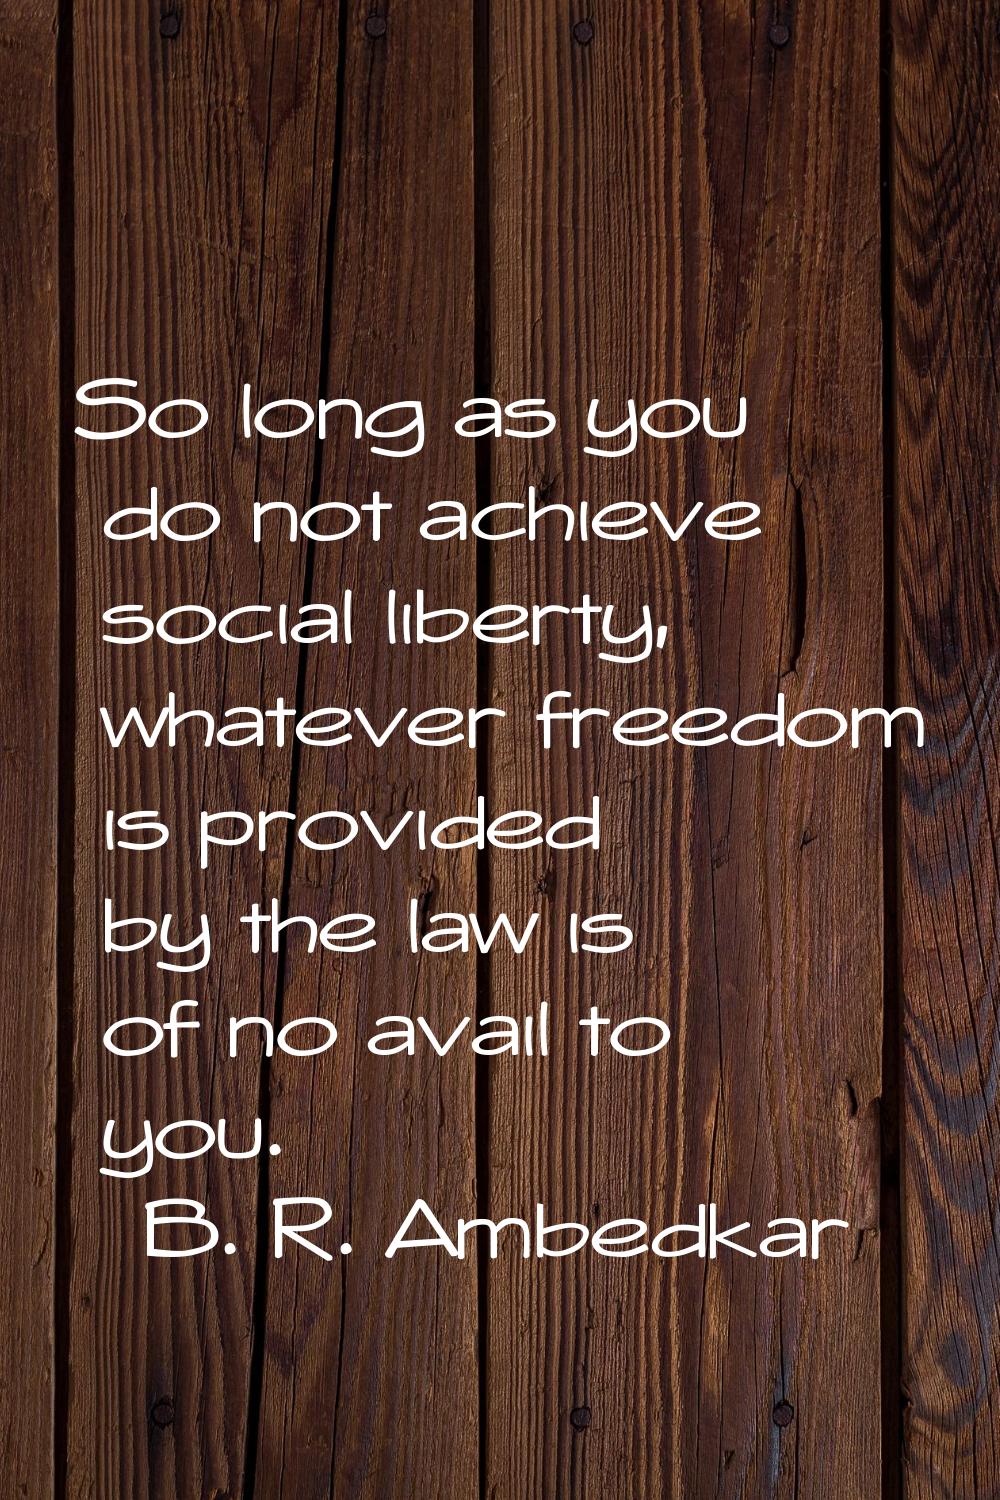 So long as you do not achieve social liberty, whatever freedom is provided by the law is of no avai